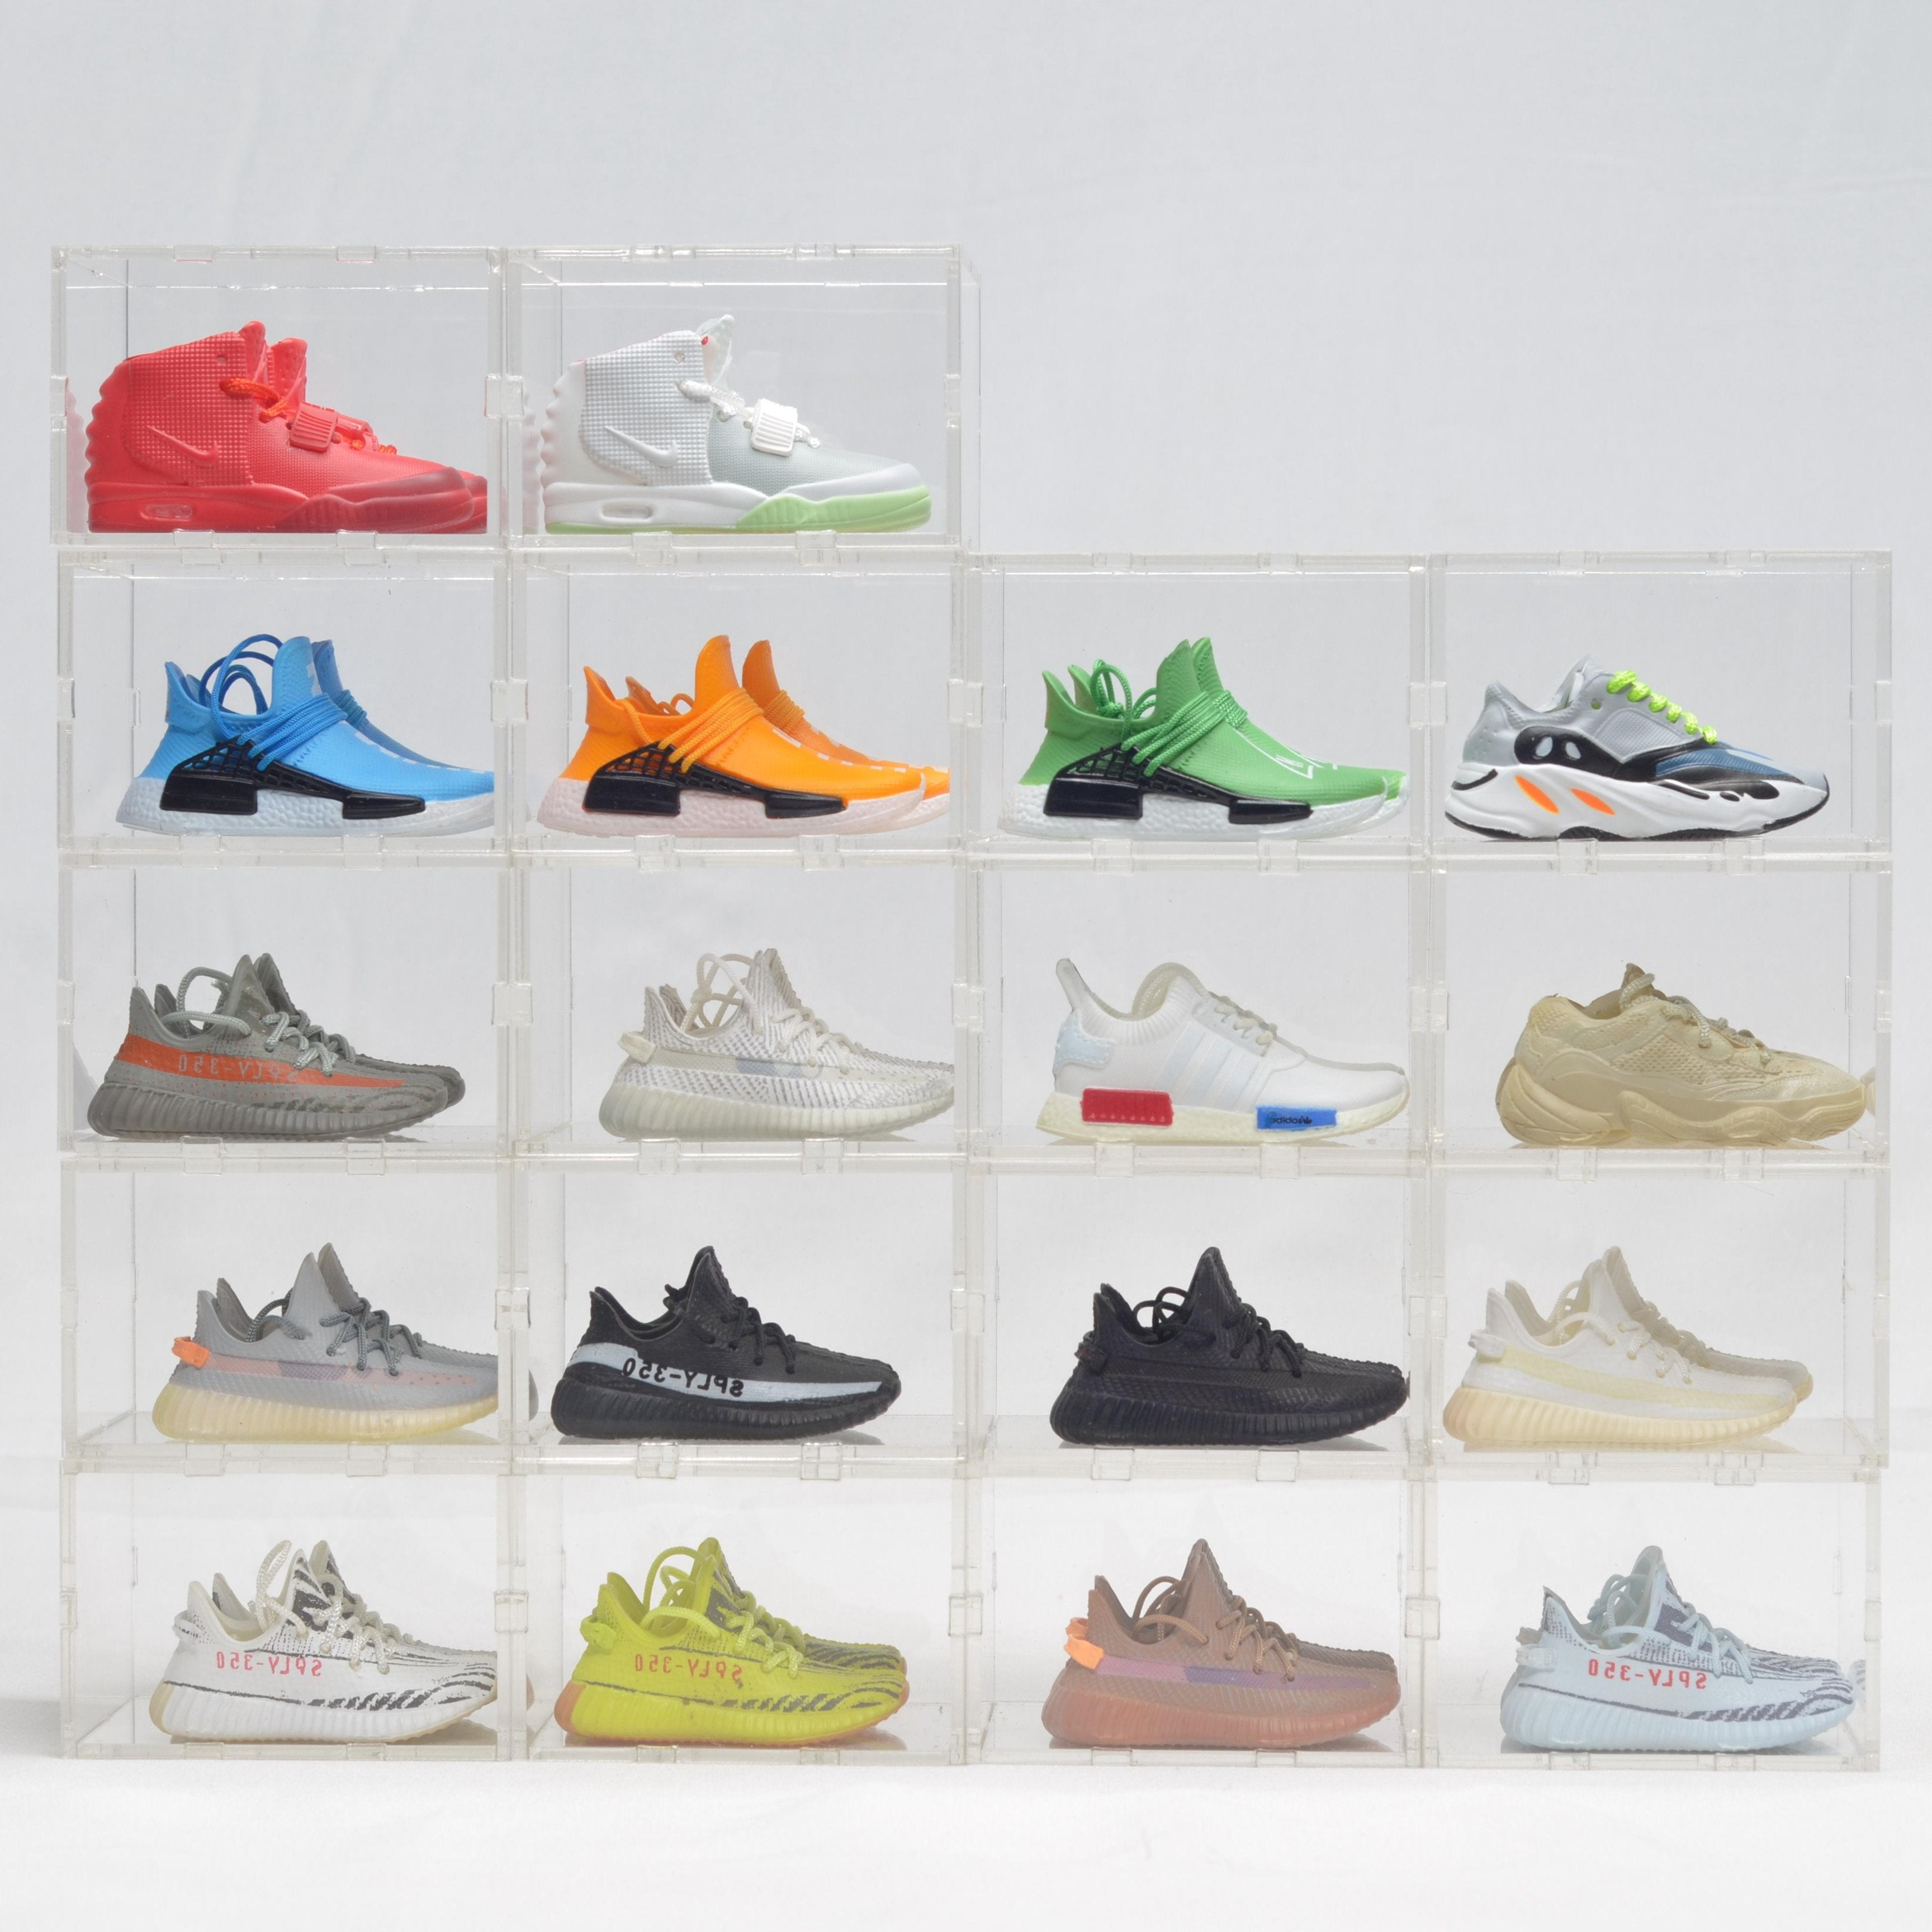 Yeezy/NMD Mini Sneakers Collection with Display Case